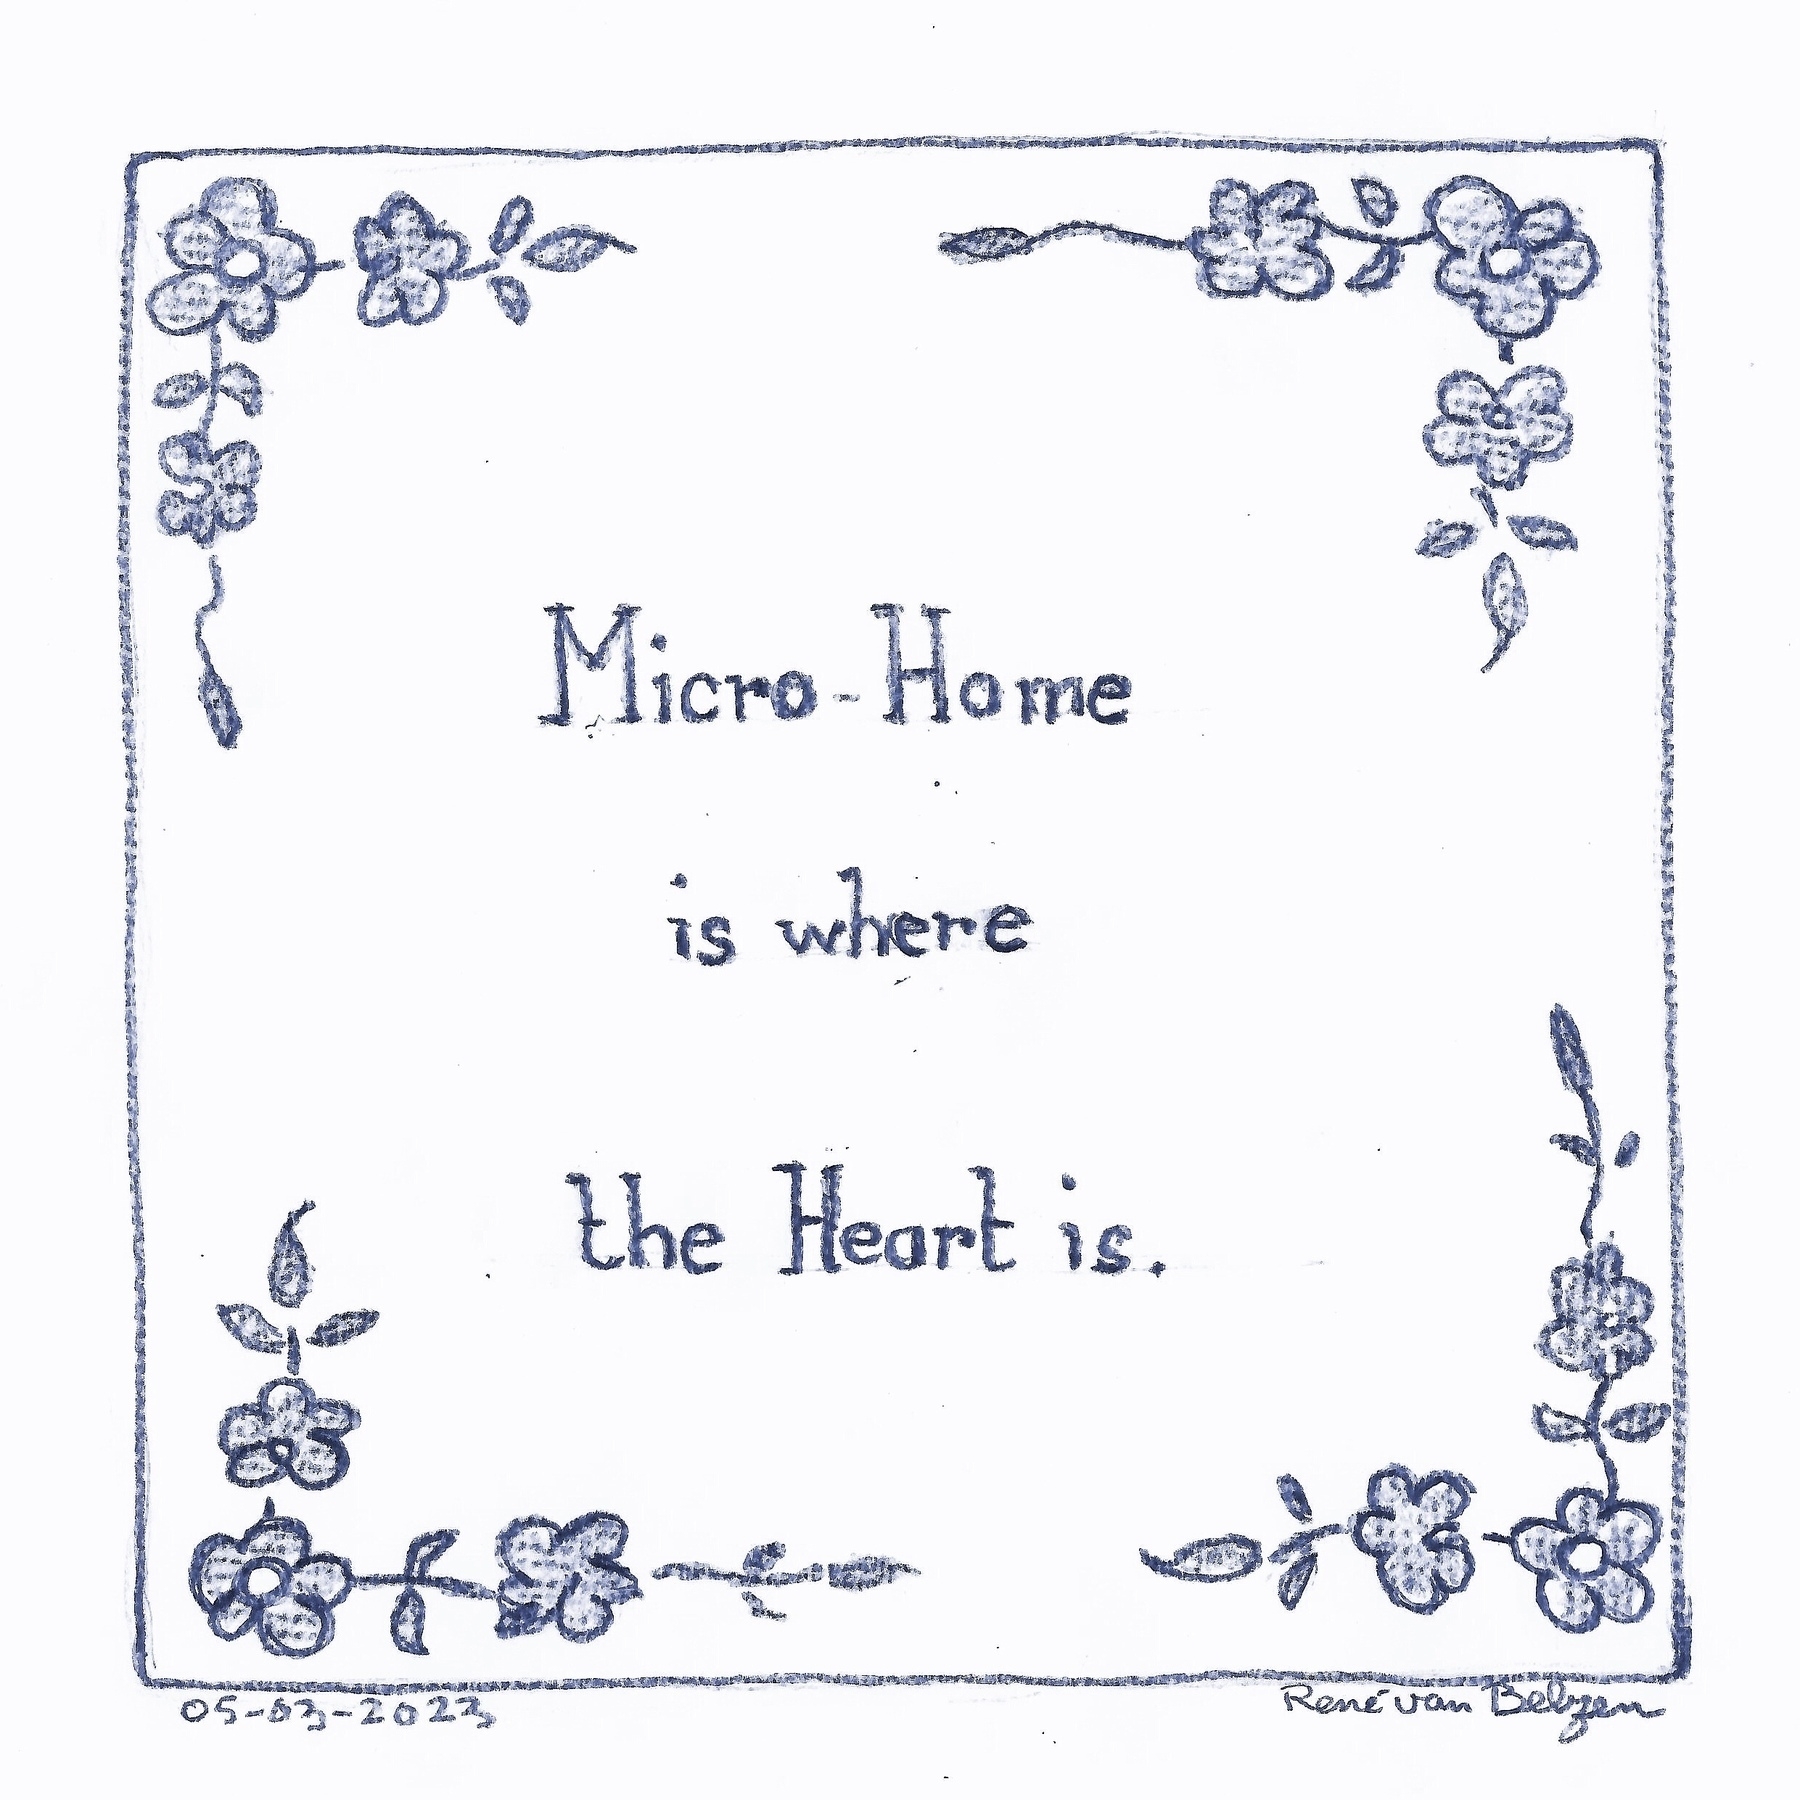 wisdom tile with text: Micro-Home is where the Heart is.